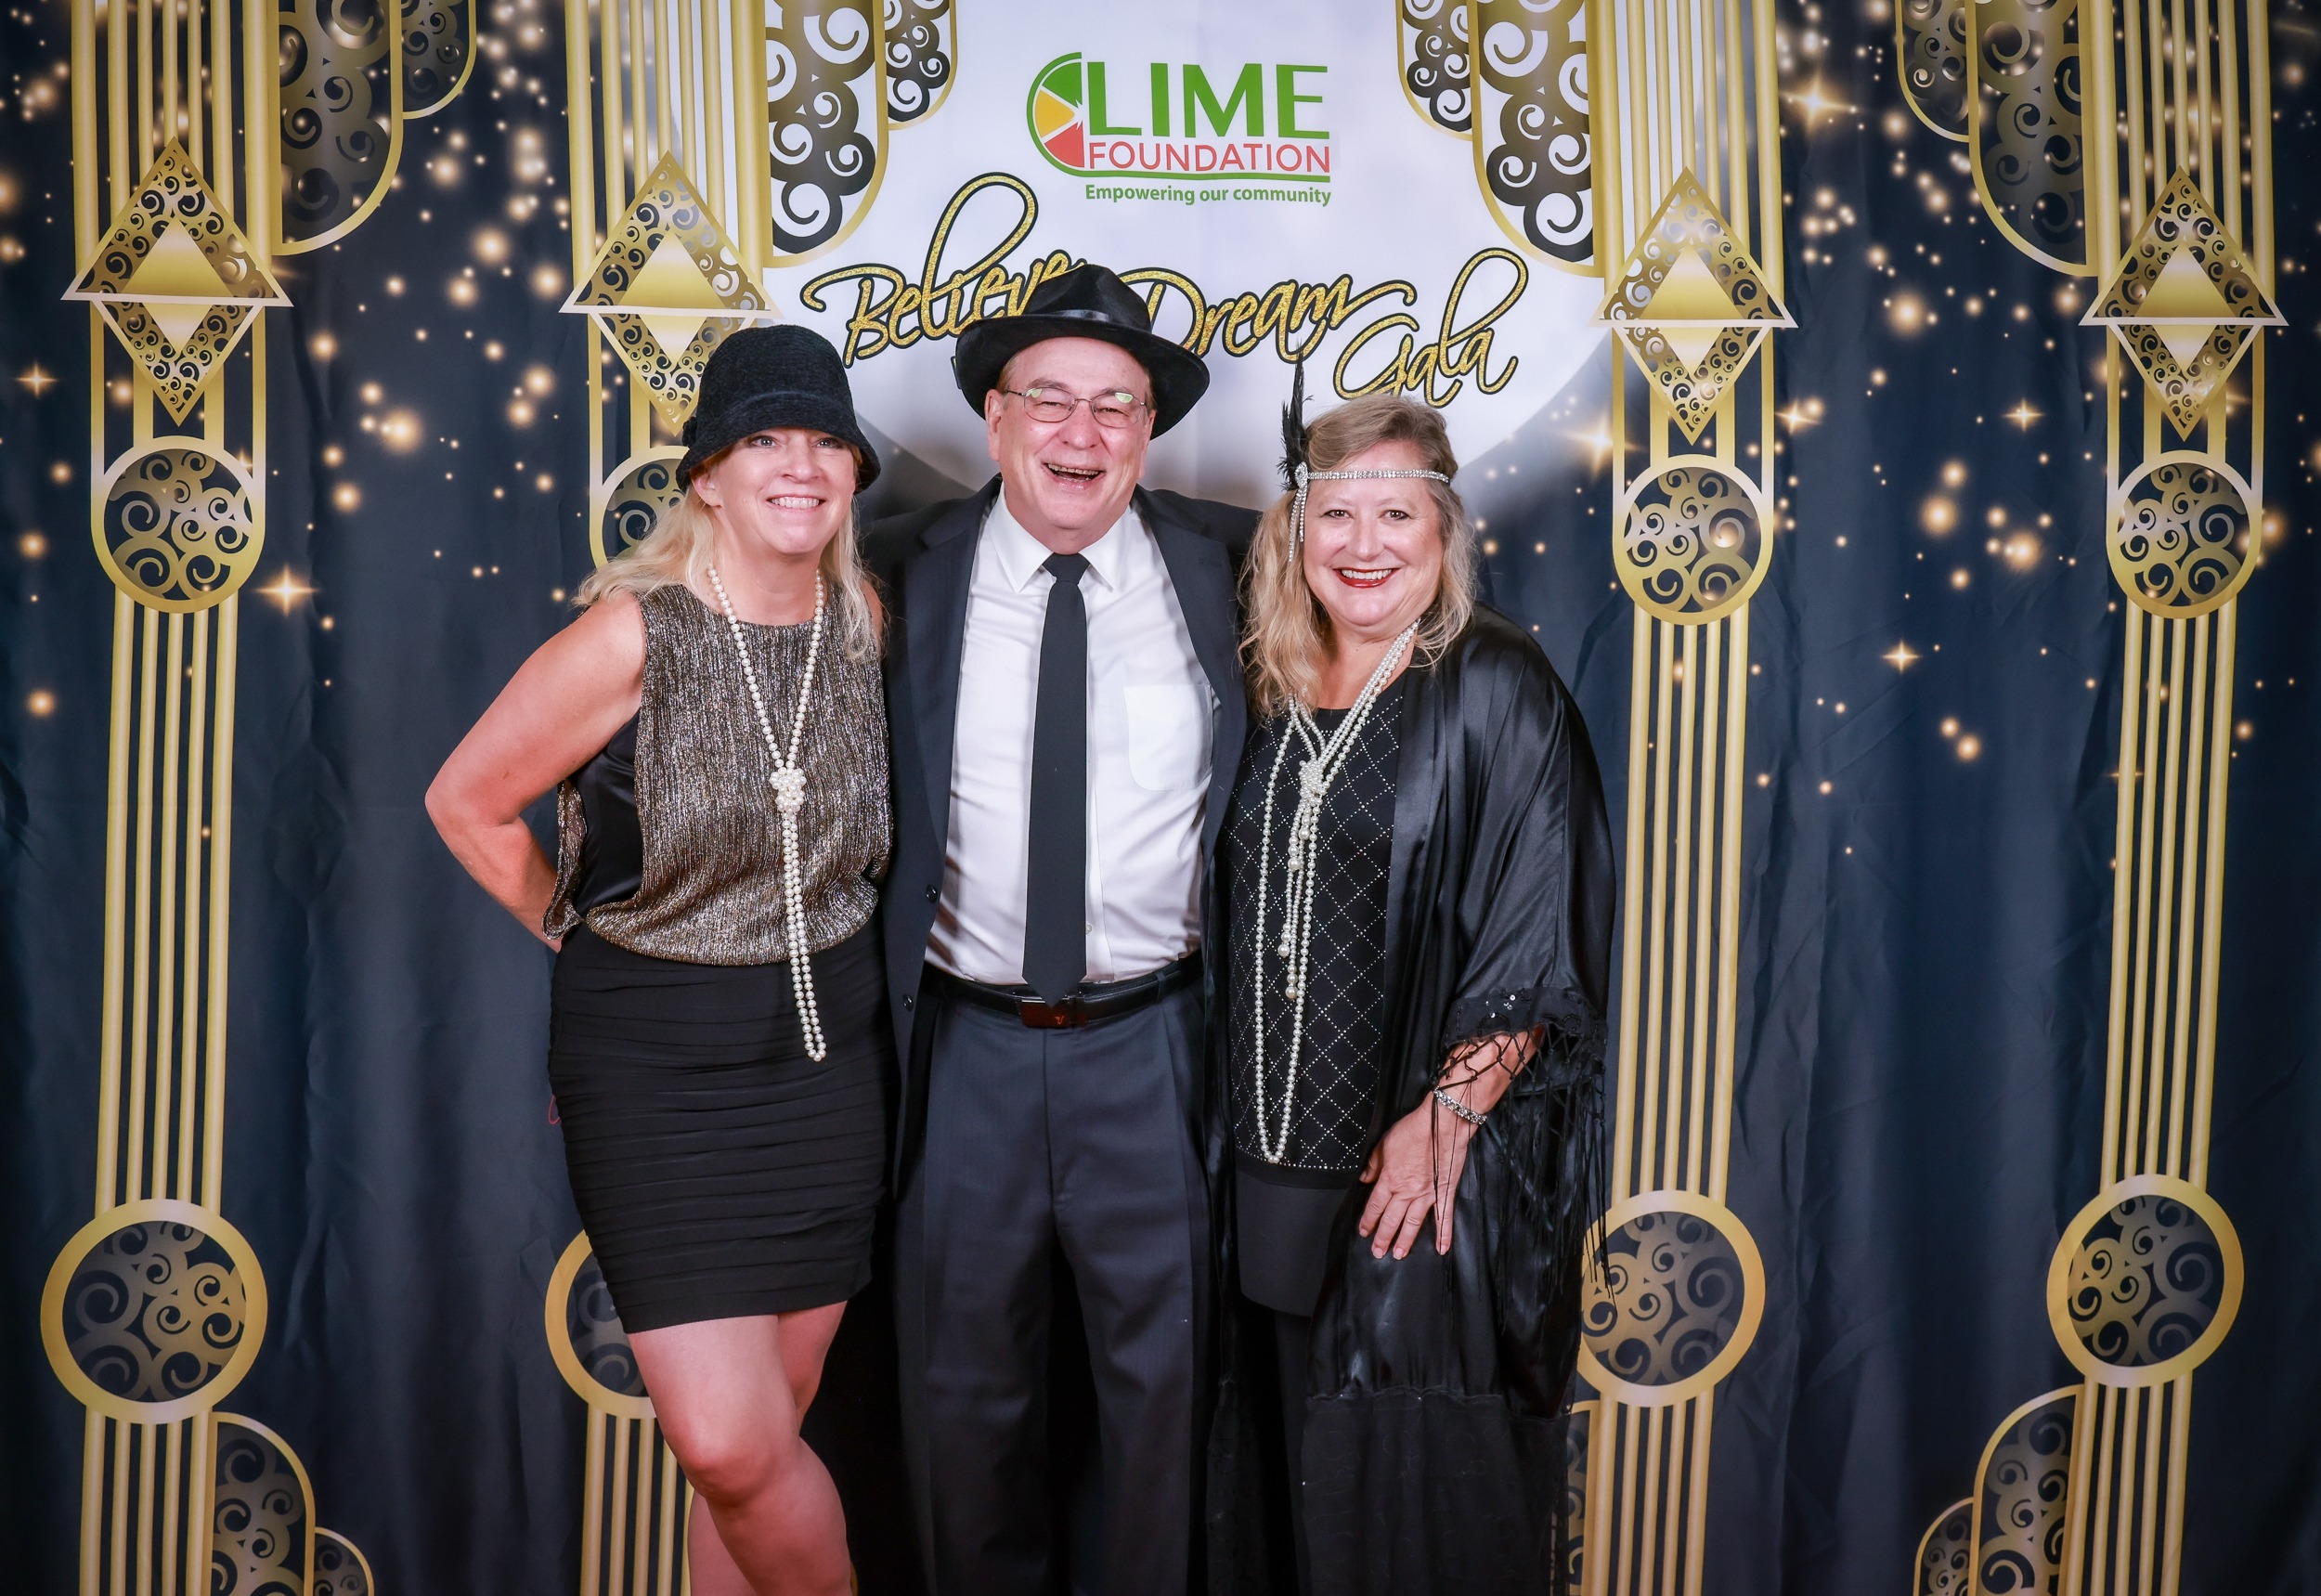 Three people posing for a photo in front of a gold backdrop at the LIME Foundation.